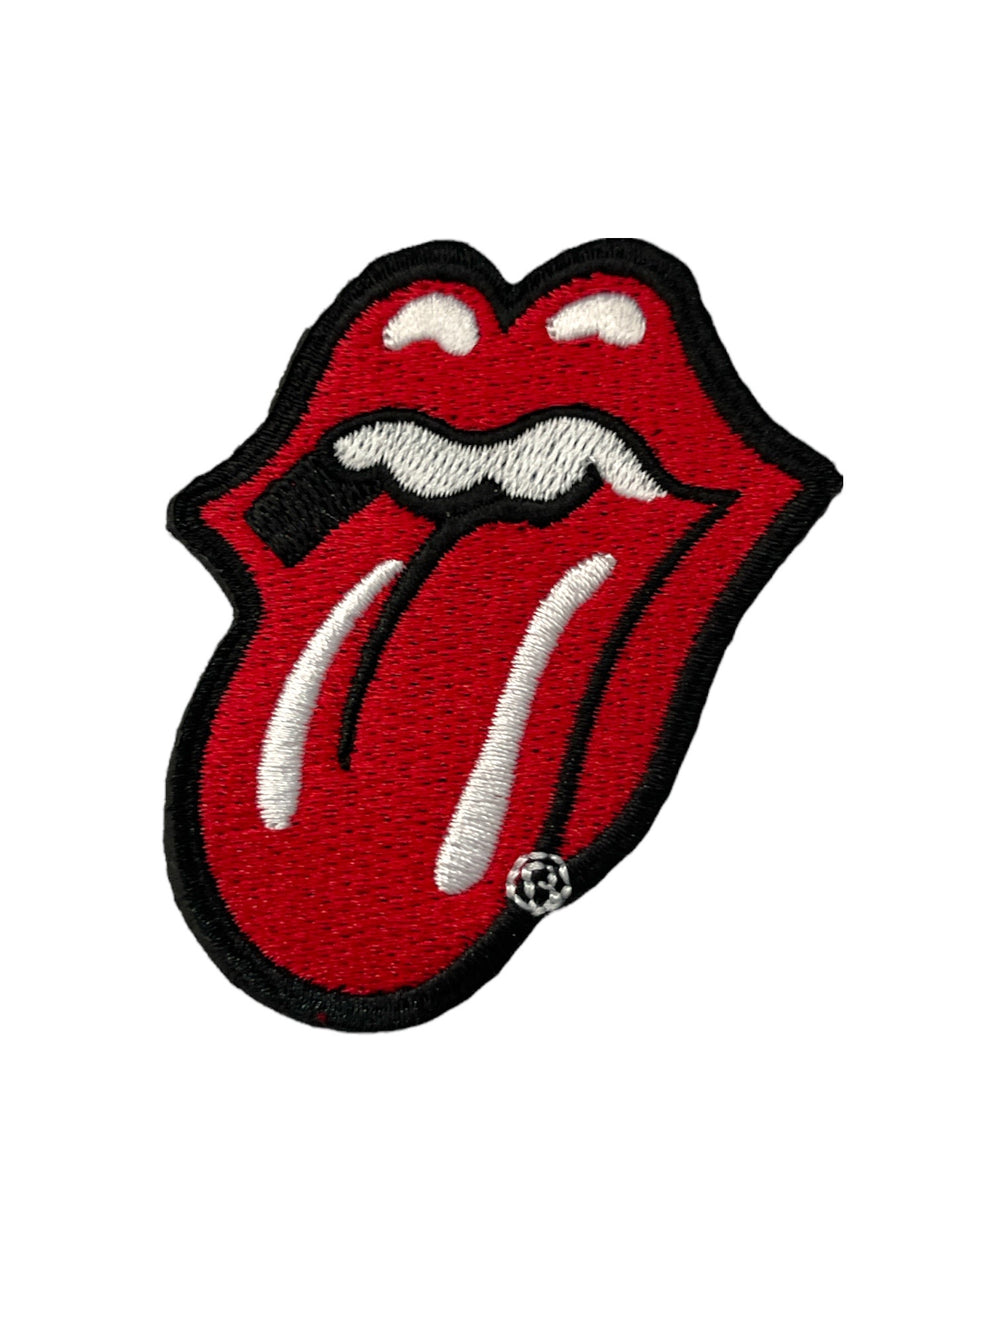 Rolling Stones The Classic Tongue Official Woven Patch Brand New 10 x 8 Large